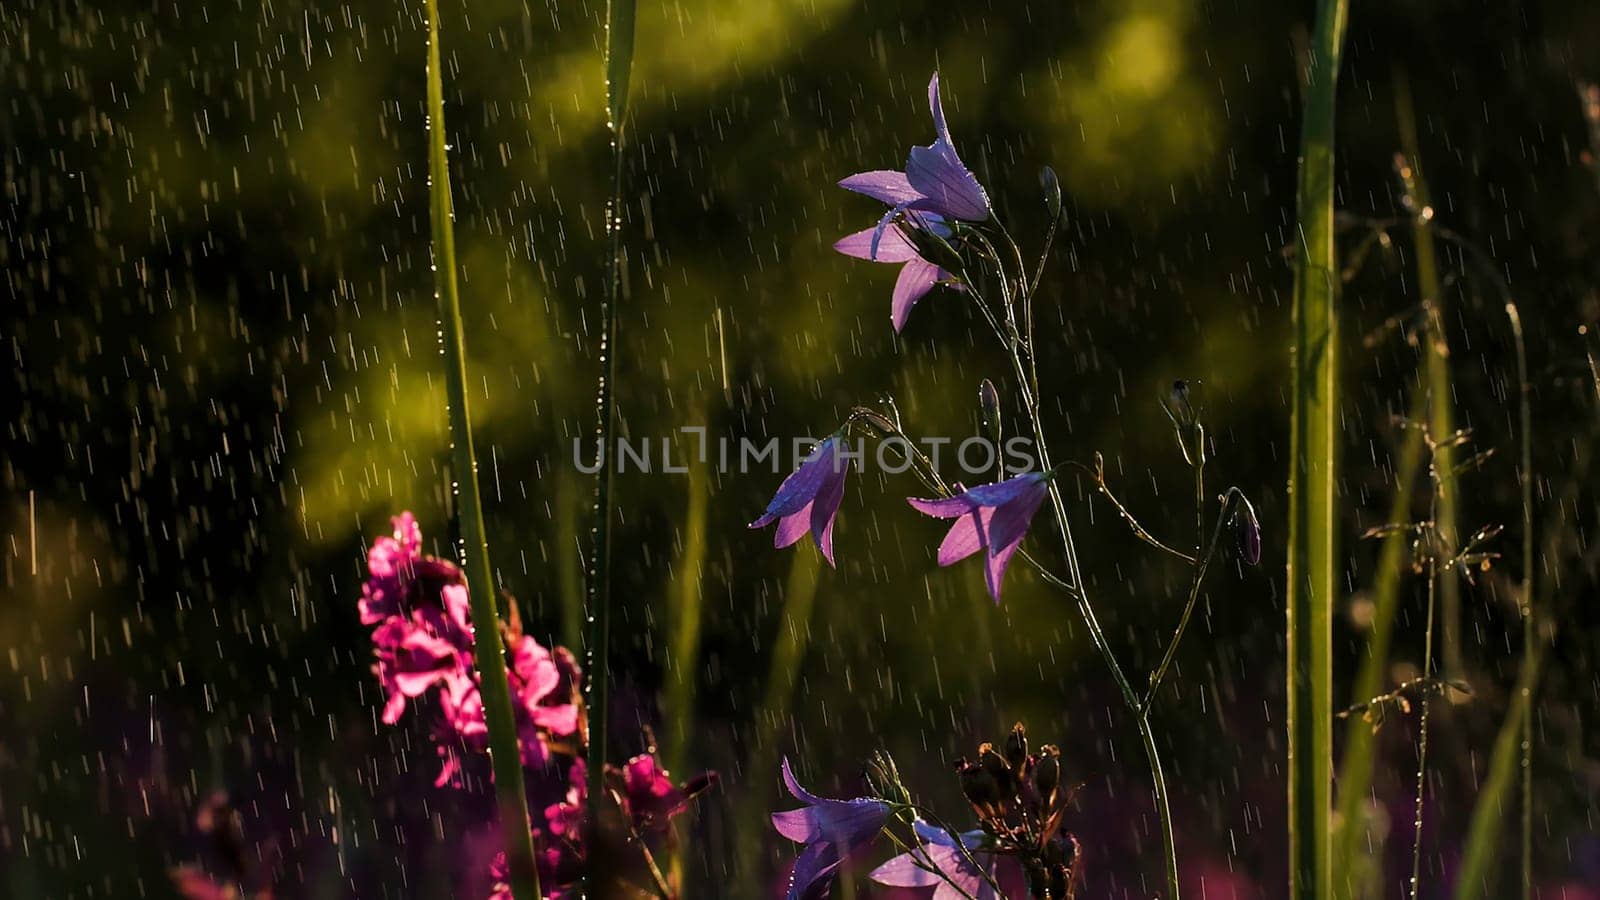 Bluebell flowers . Creative. Purple little flowers and green grass around in the rain.